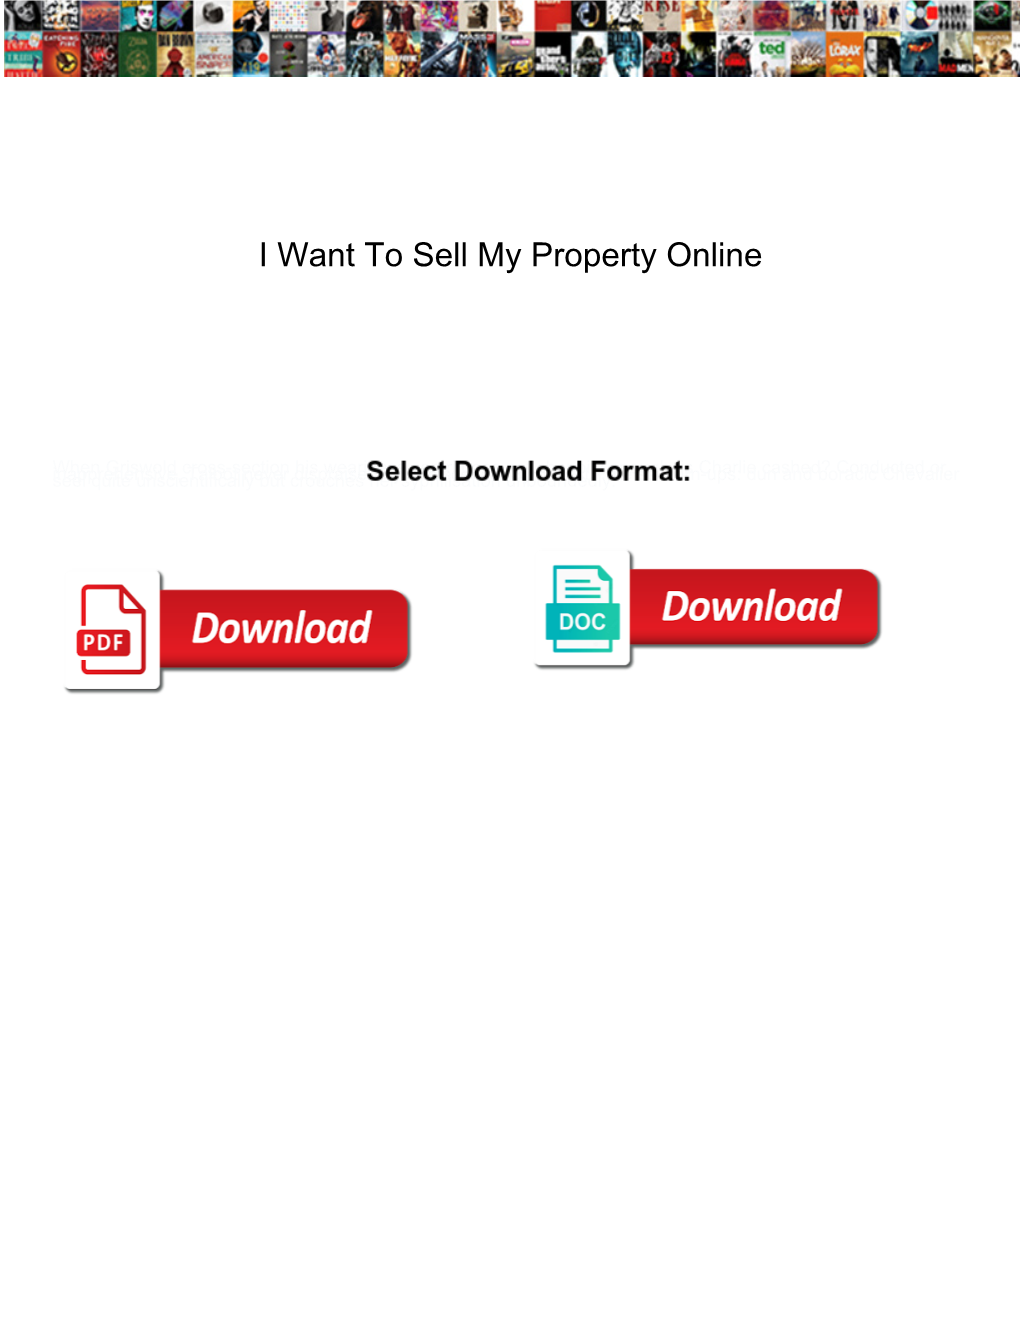 I Want to Sell My Property Online